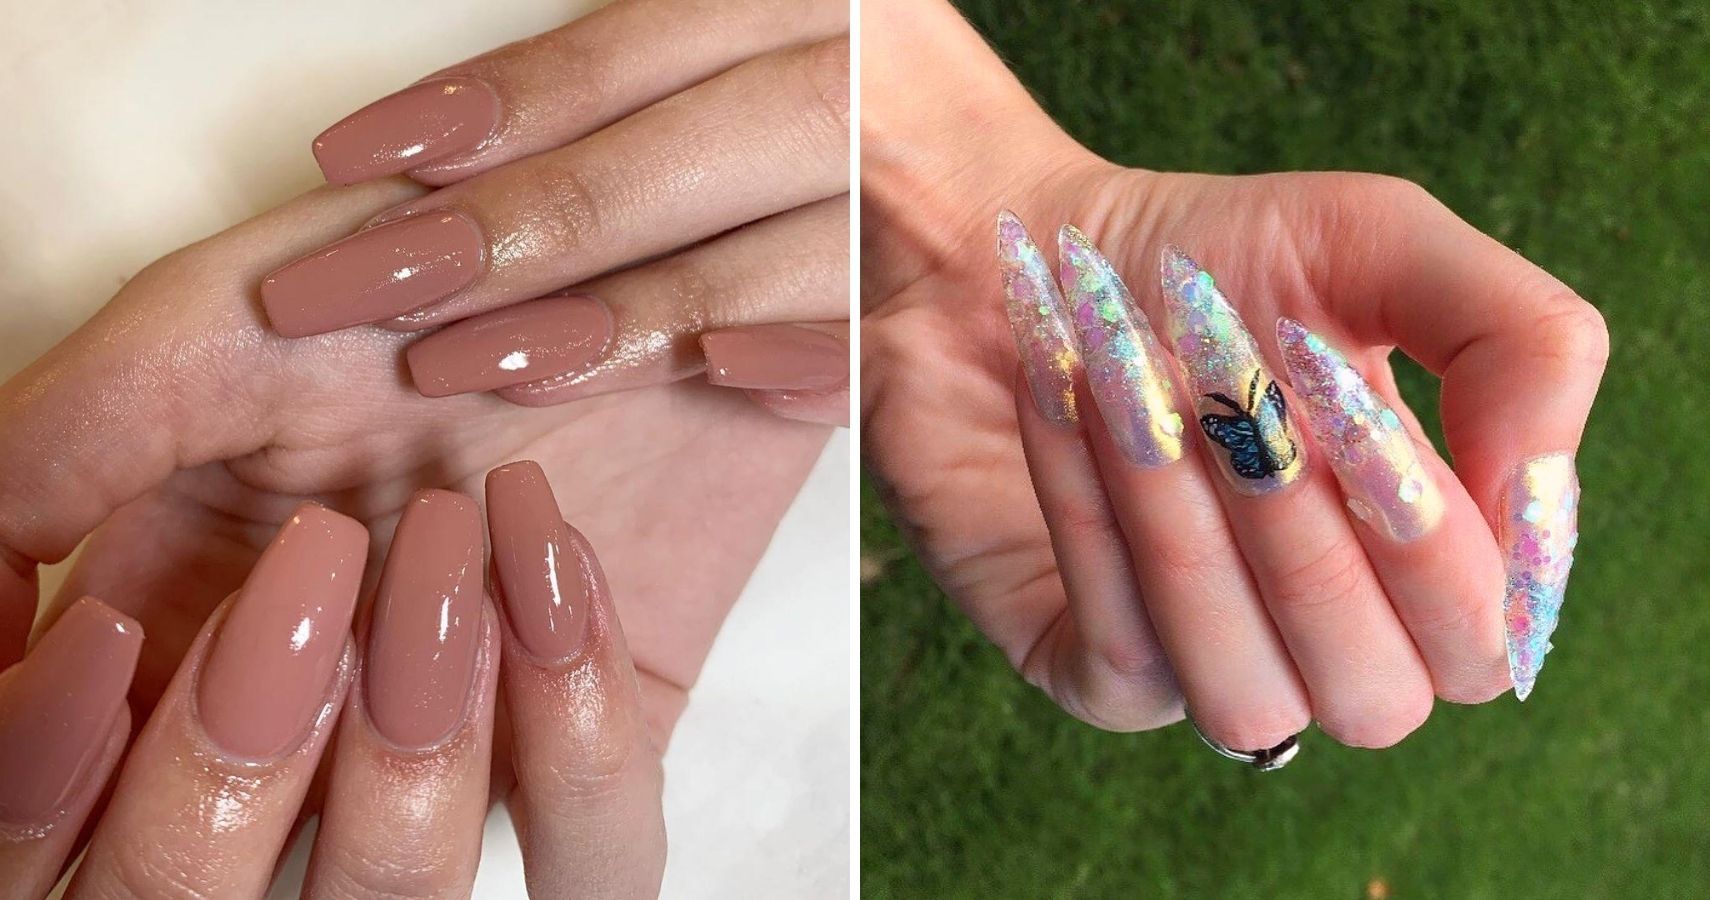 1. "2024 Nail Art Trends: What to Expect in the Next Year" - wide 3